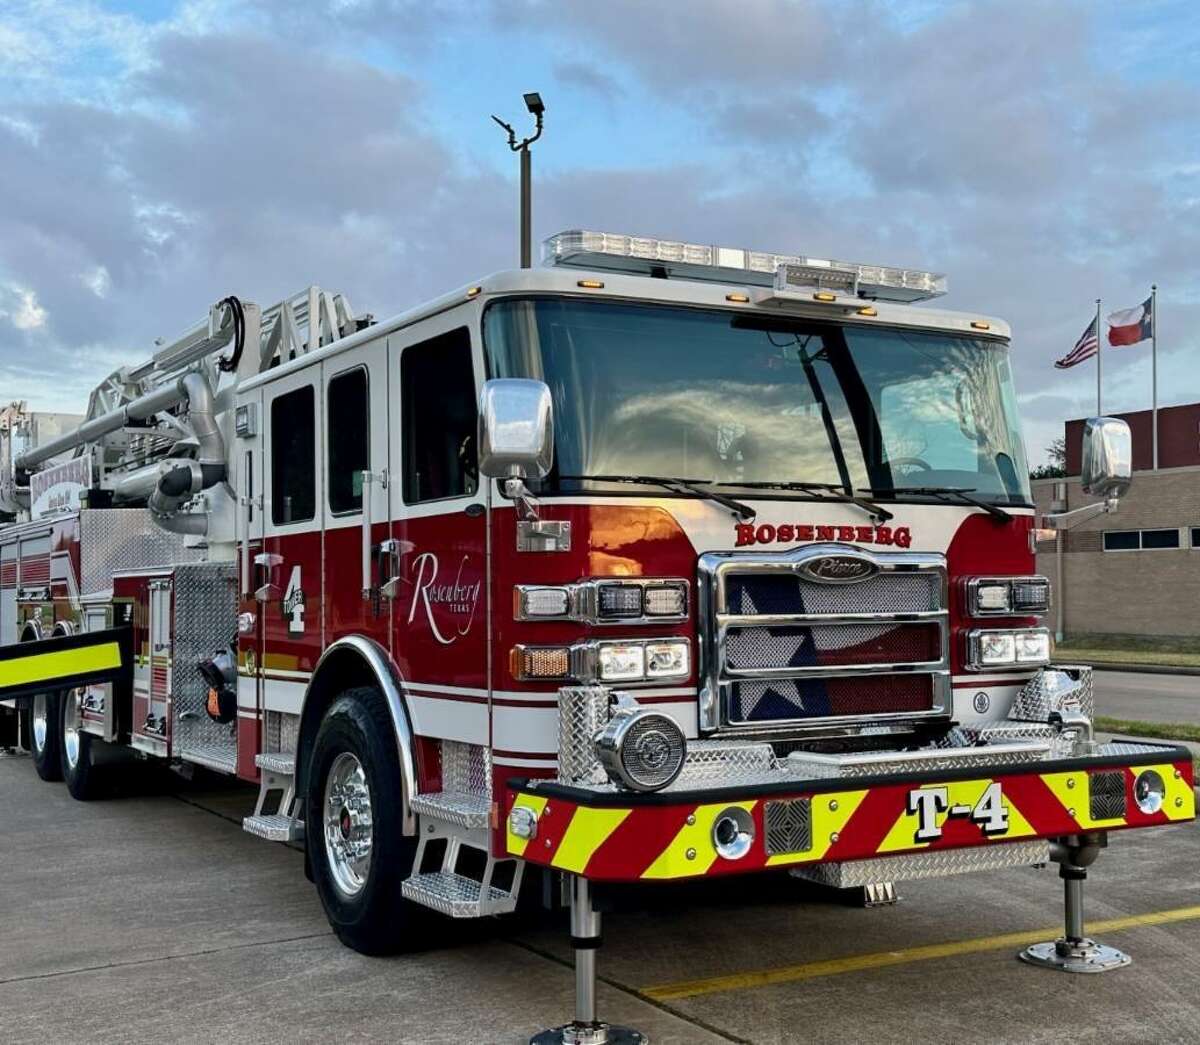 The city of Rosenberg, Texas, has received a new ladder truck for its fire department. The new apparatus cost the city $1.4 million.